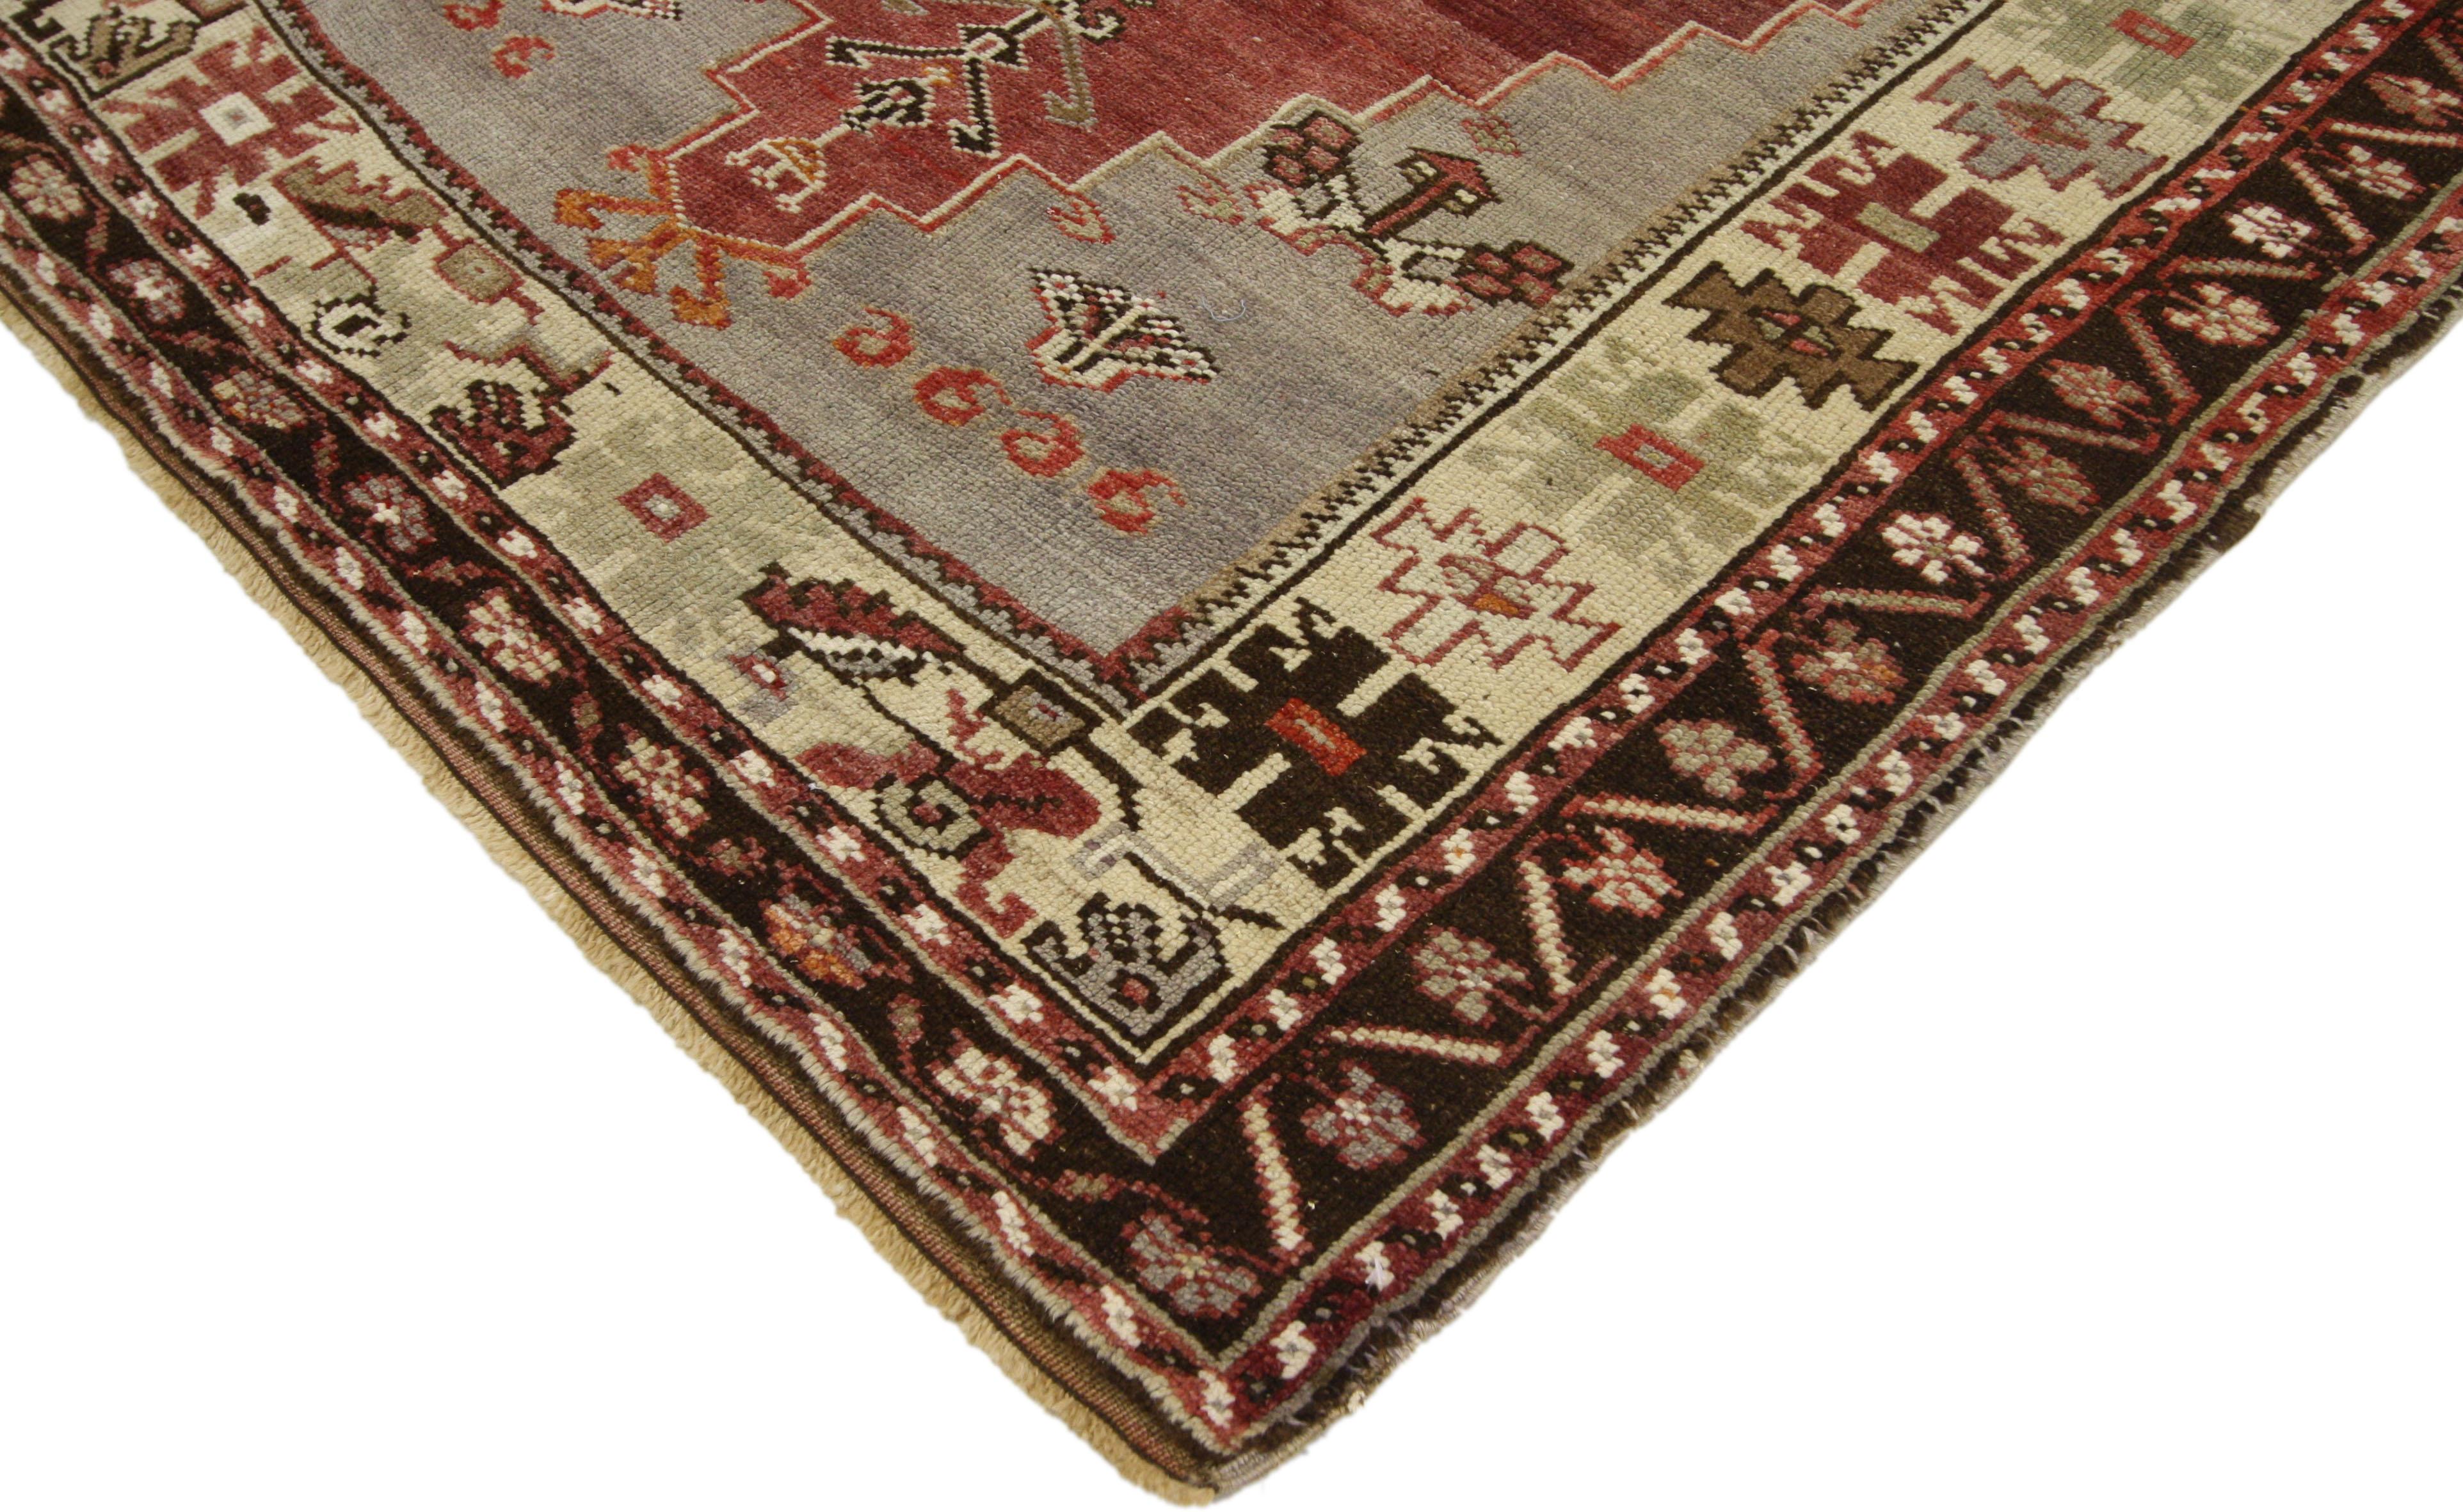 Vintage Oushak Rug with Italian Venetian Style In Good Condition For Sale In Dallas, TX